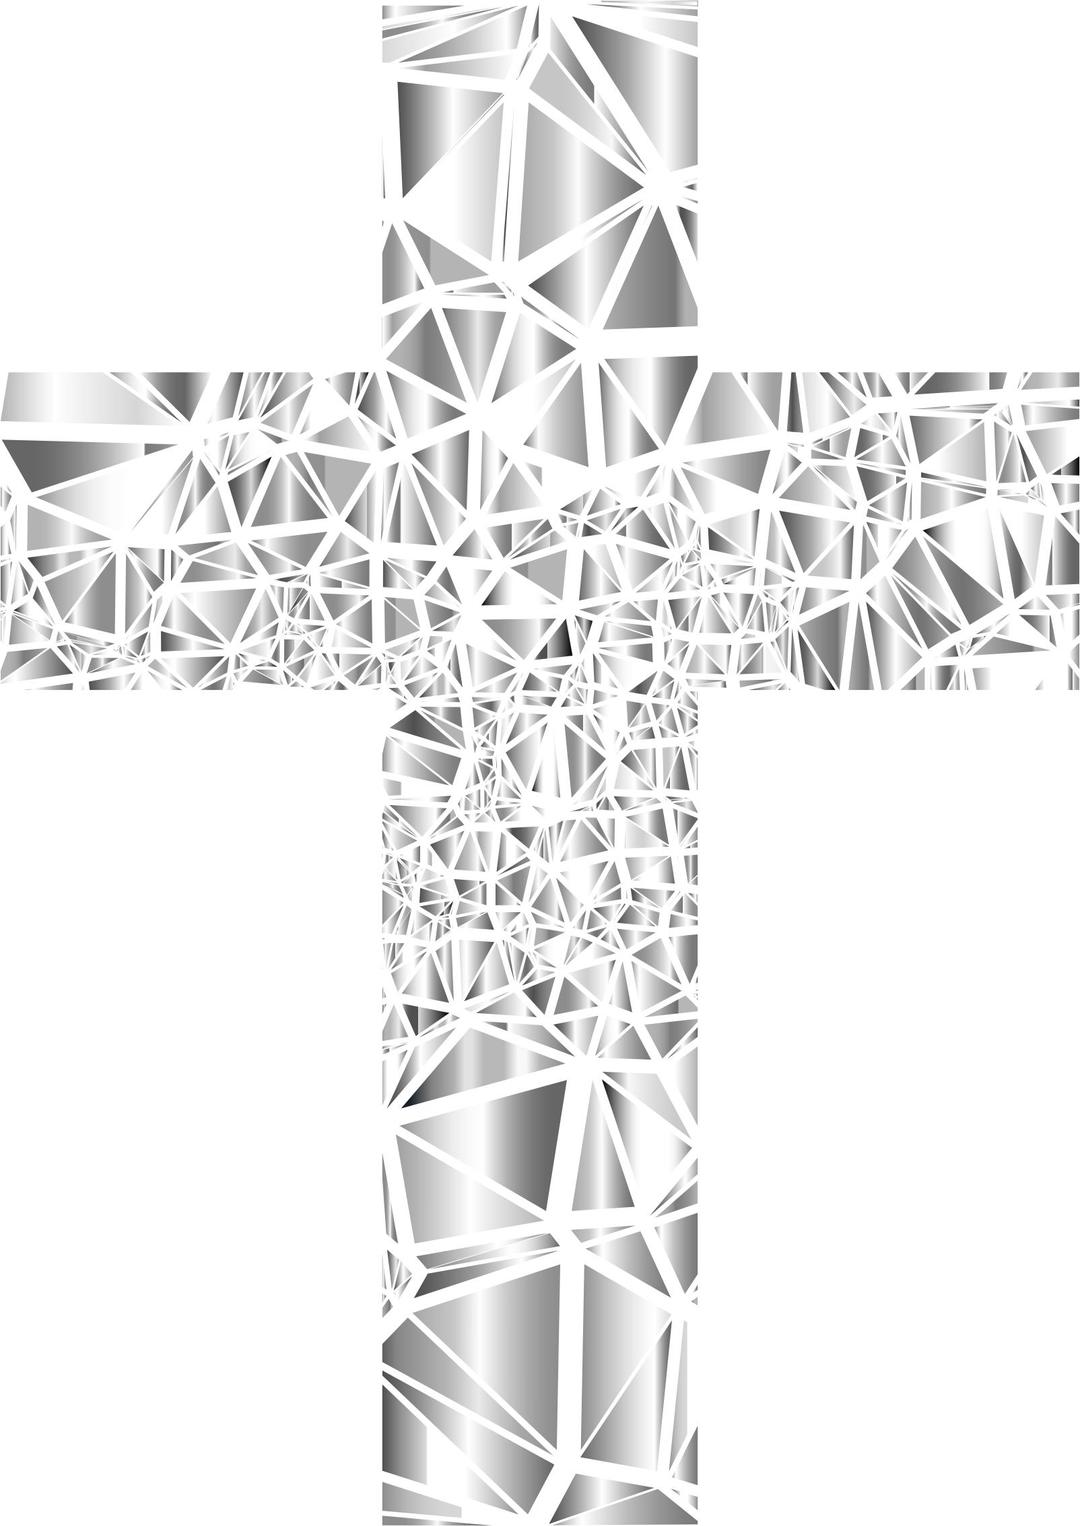 Low Poly Stained Glass Cross 4 No Background png transparent